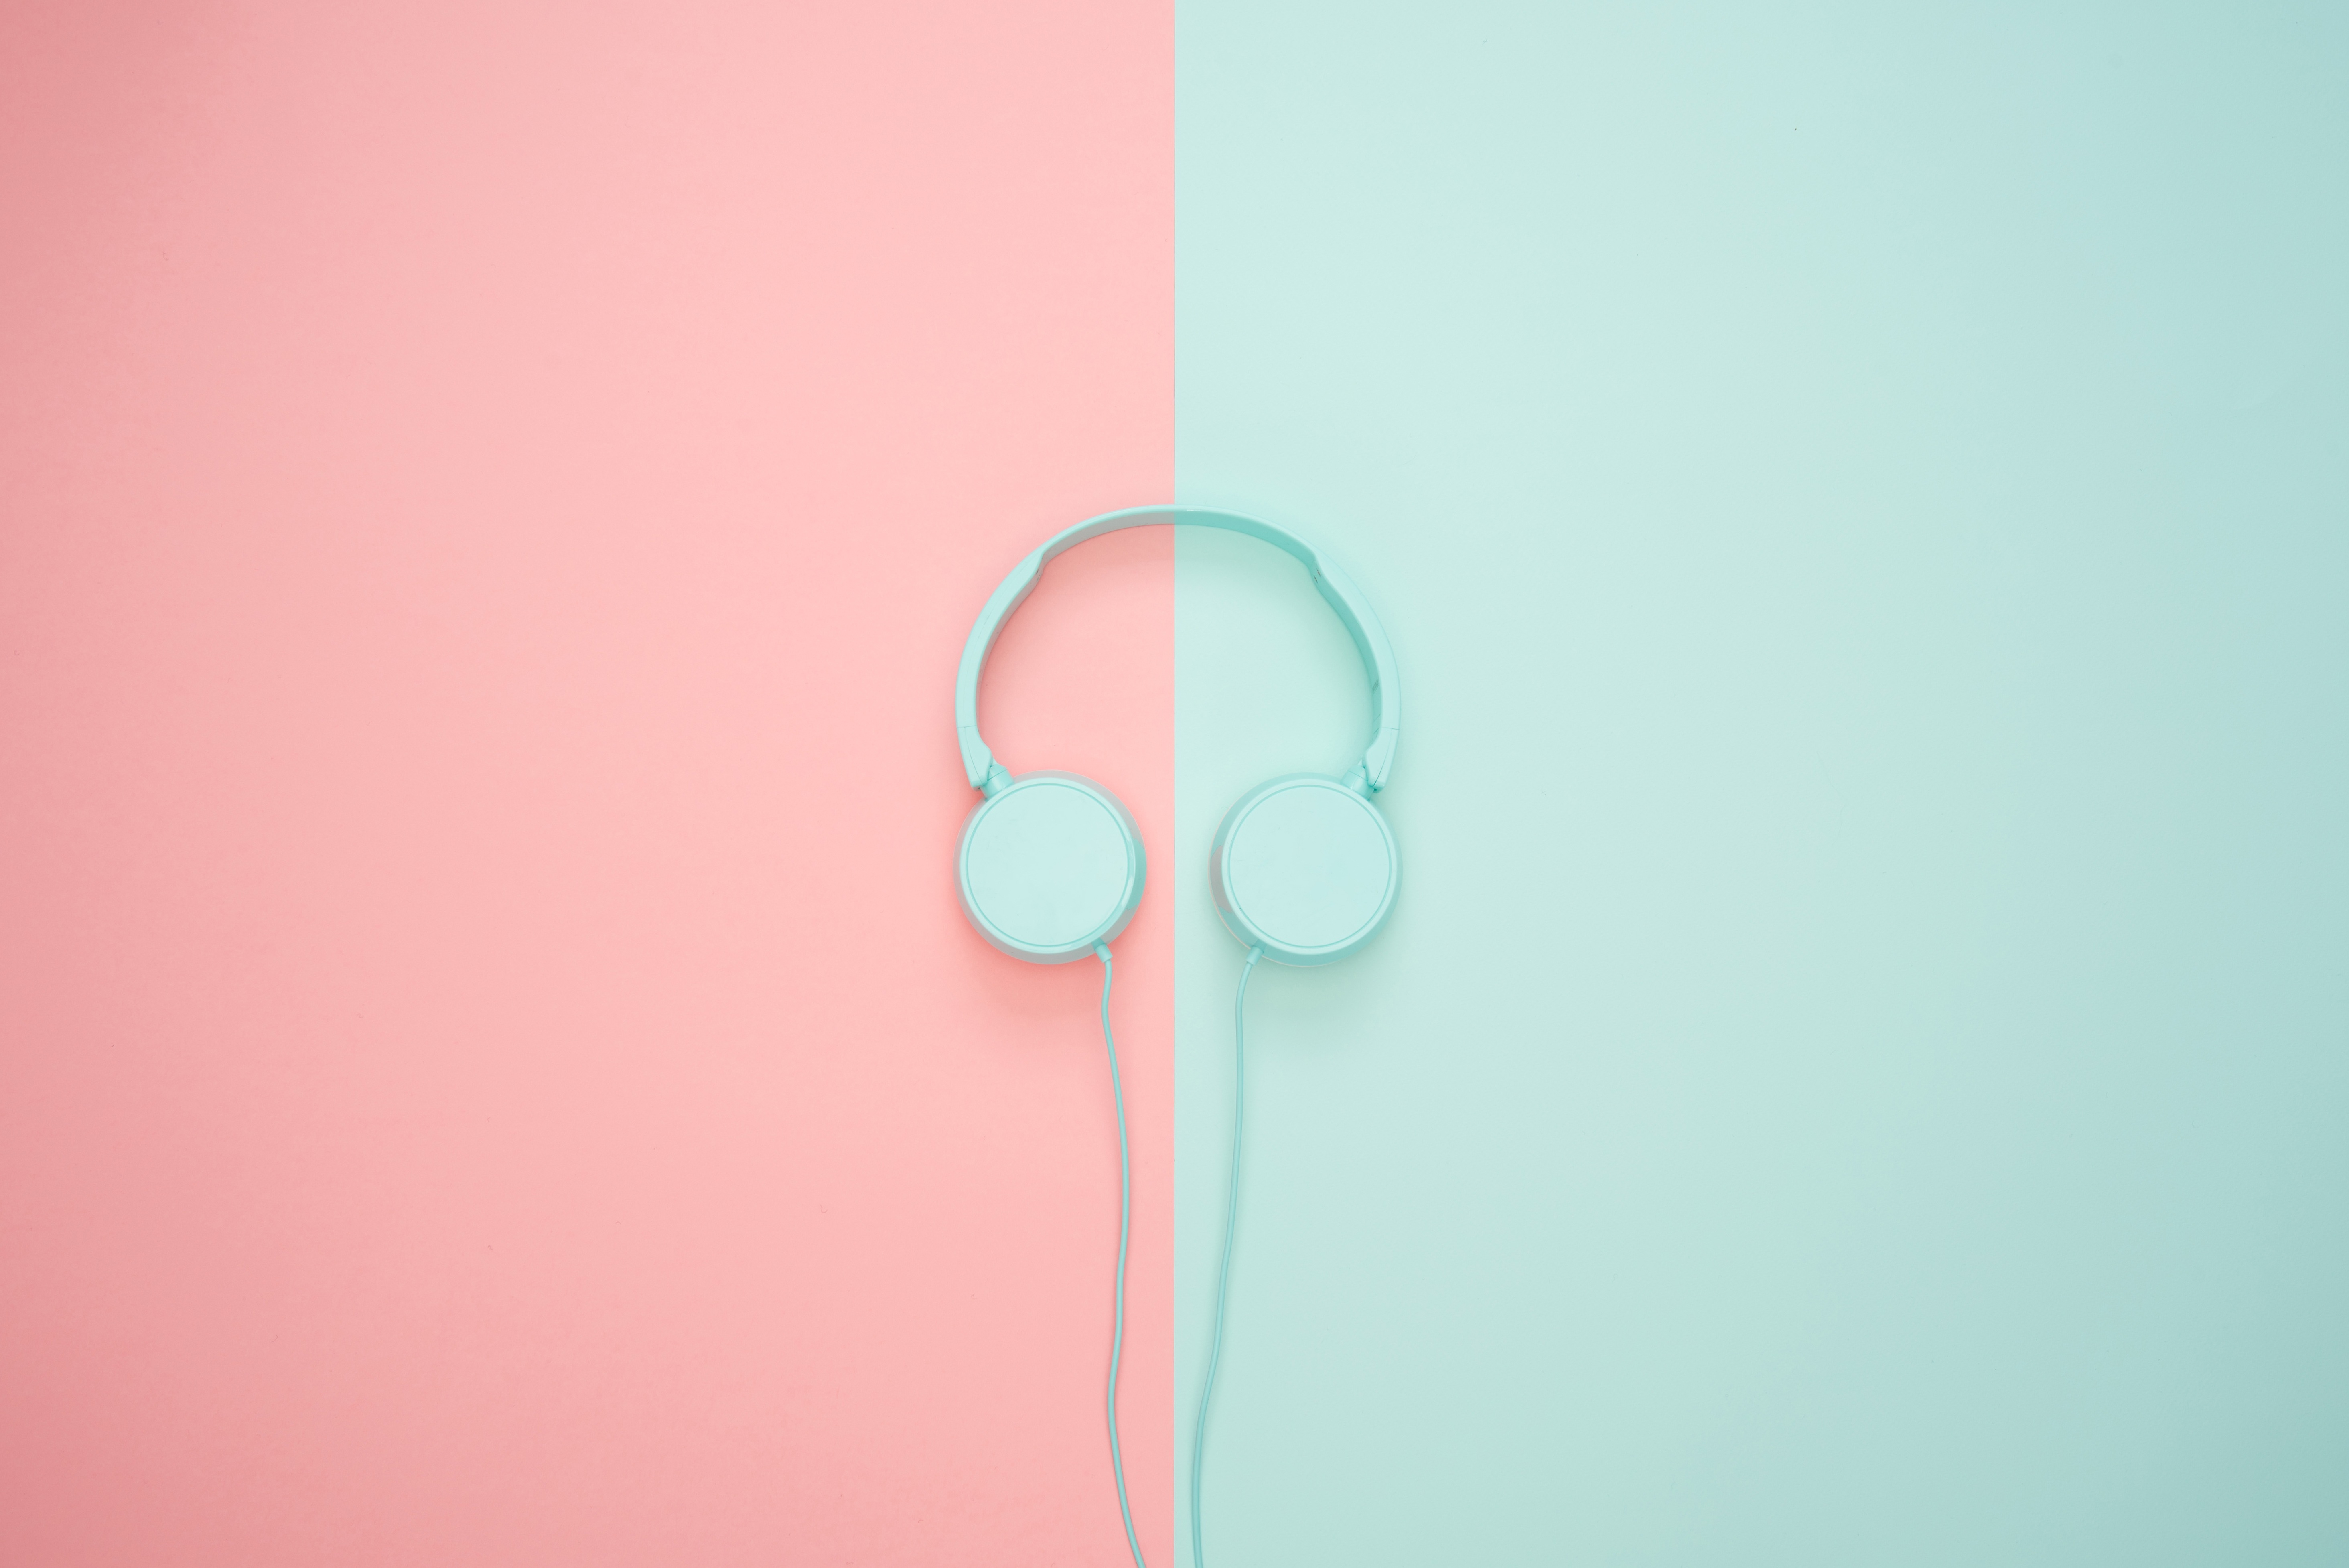 78205 download wallpaper pink, headphones, minimalism, pastel screensavers and pictures for free